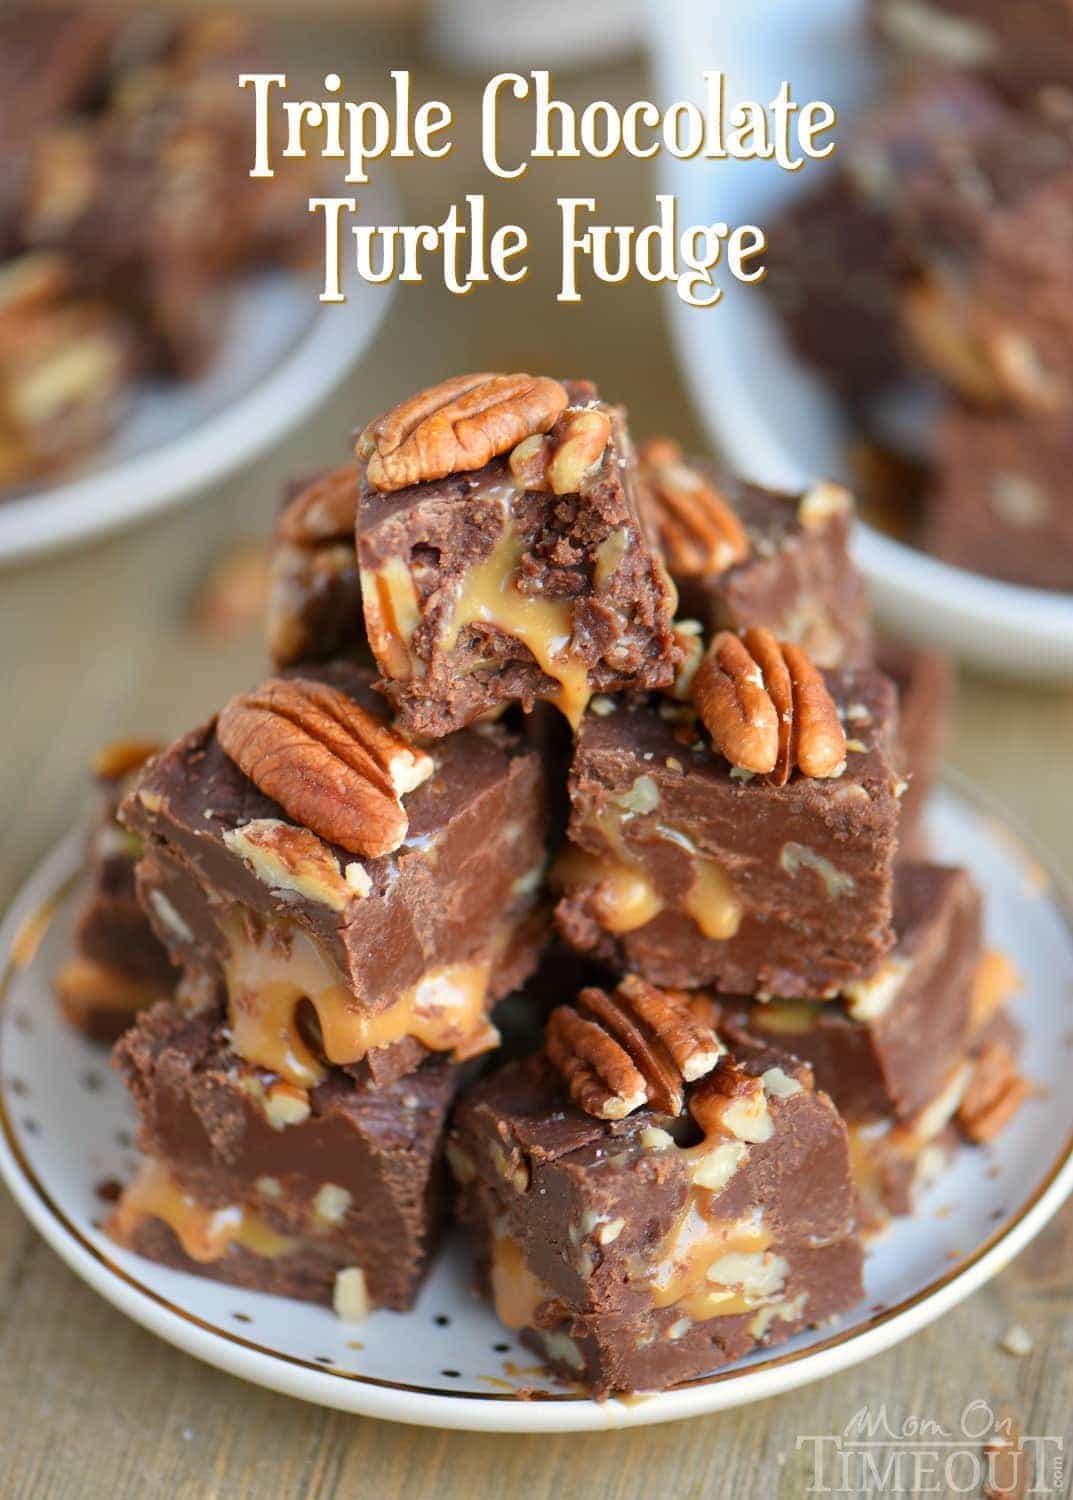 This decadent Triple Chocolate Turtle Fudge features three different types of chocolate and an ooey, gooey caramel center that is hard to resist! Great for gift giving and the holidays! // Mom On Timeout